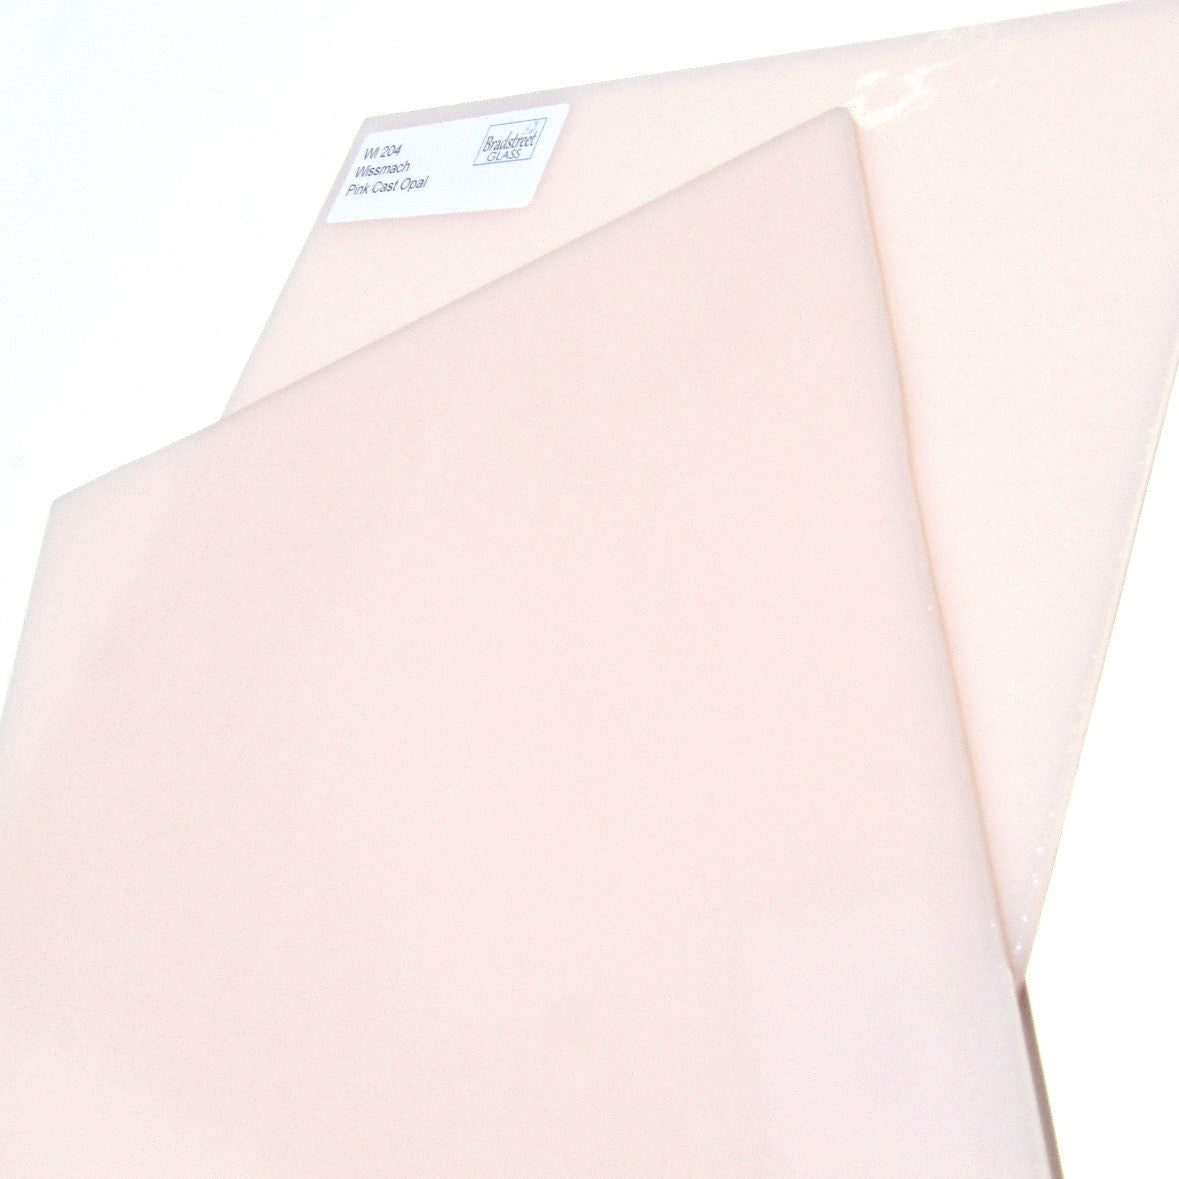 Wissmach Pink Cast Opal Opaque Stained Glass Sheet WI 204